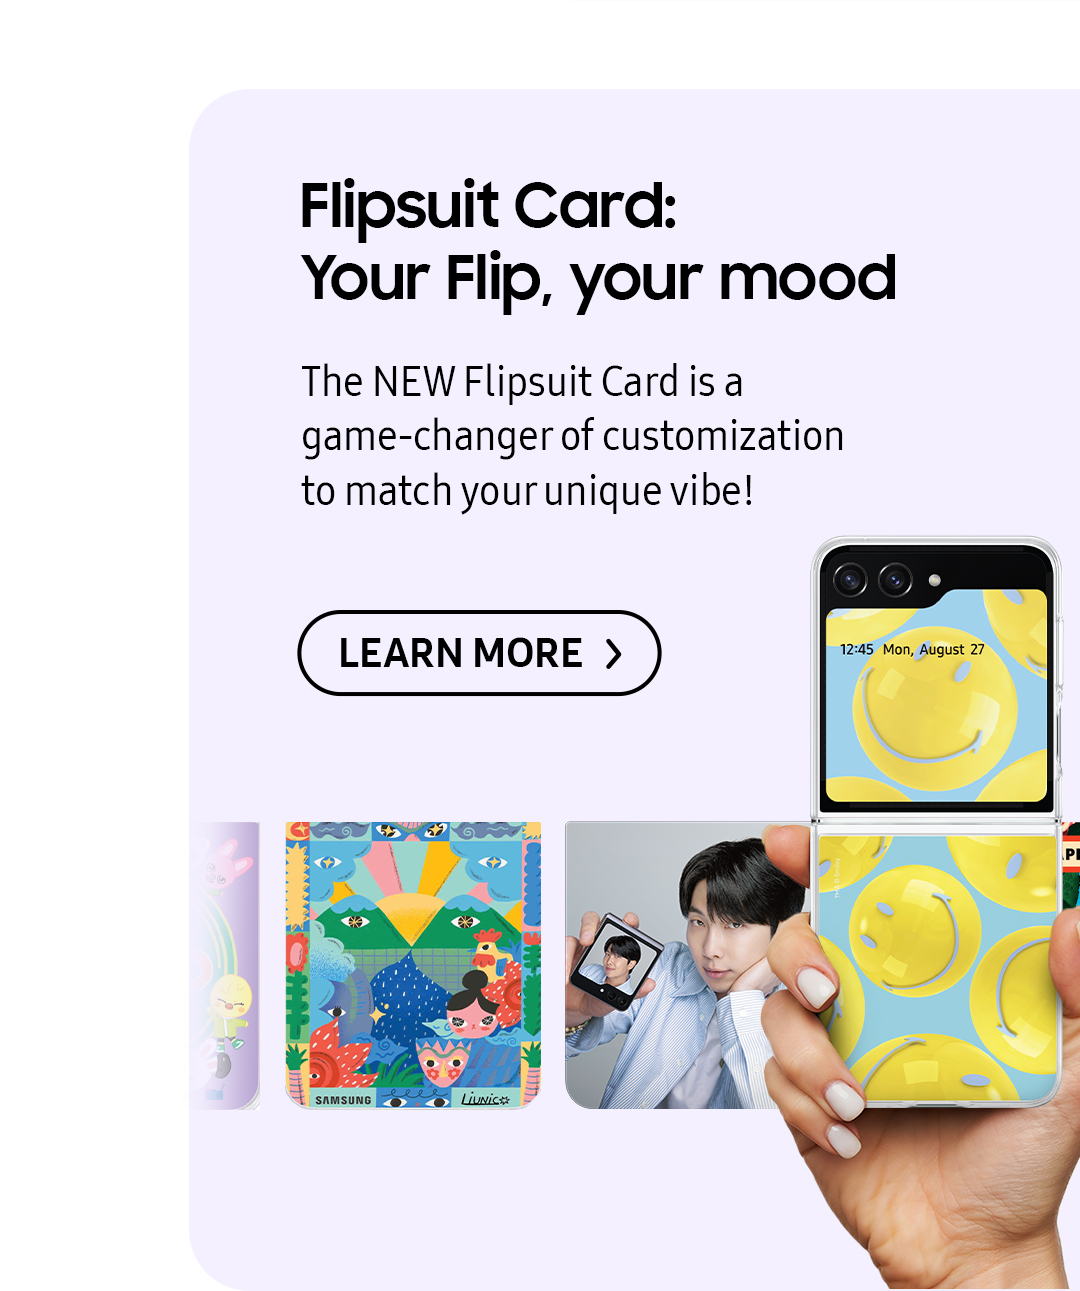 Flipsuit Card: Your Flip, your mood | The NEW Flipsuit Card is a game-changer of customization to match your unique vibe! Click here to learn more!